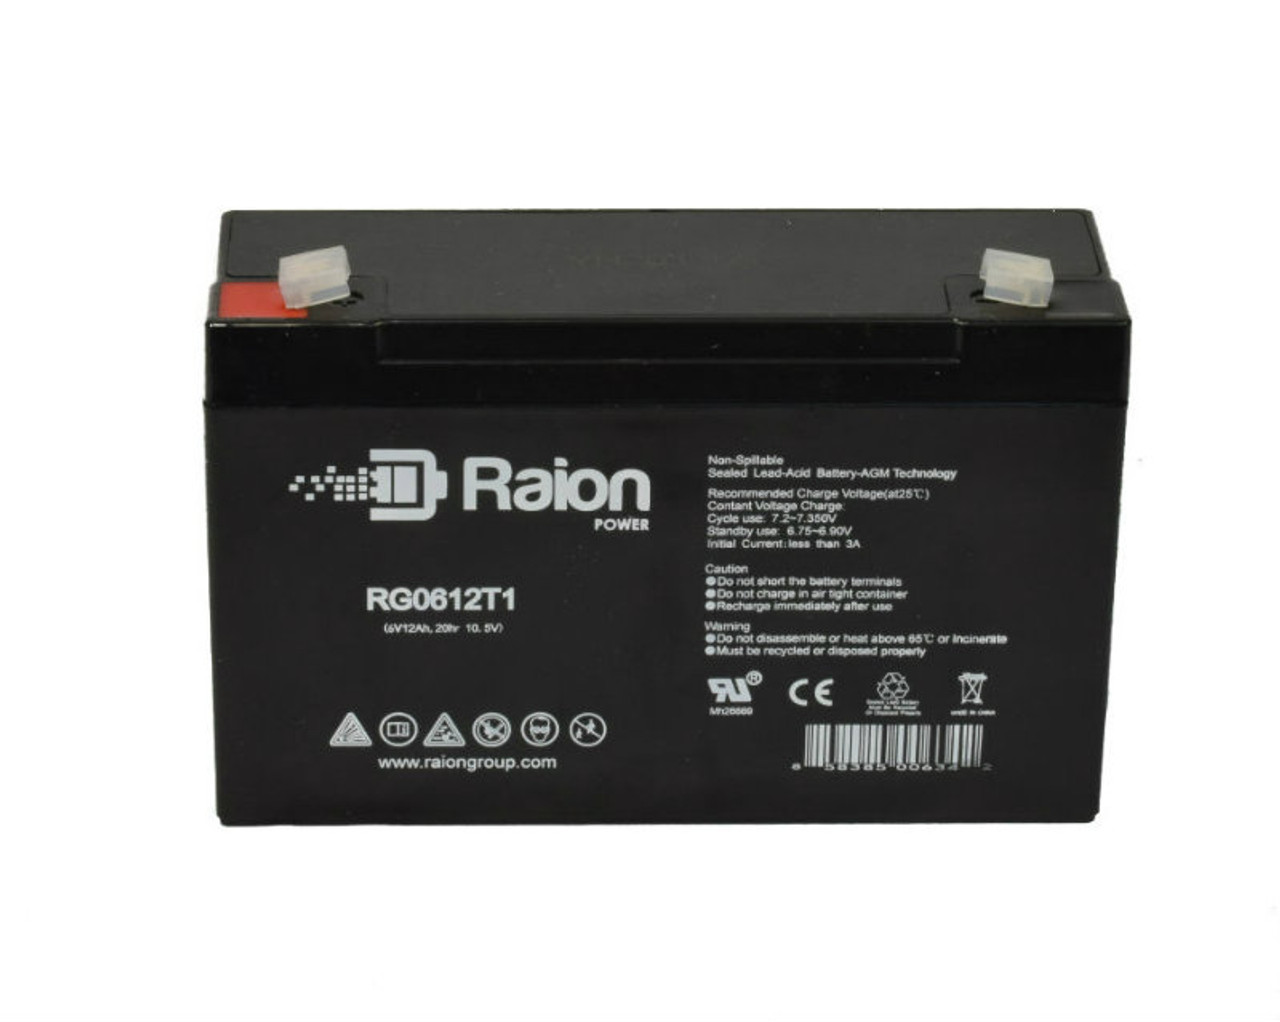 Raion Power RG06120T1 Replacement Battery Cartridge for Safe 400